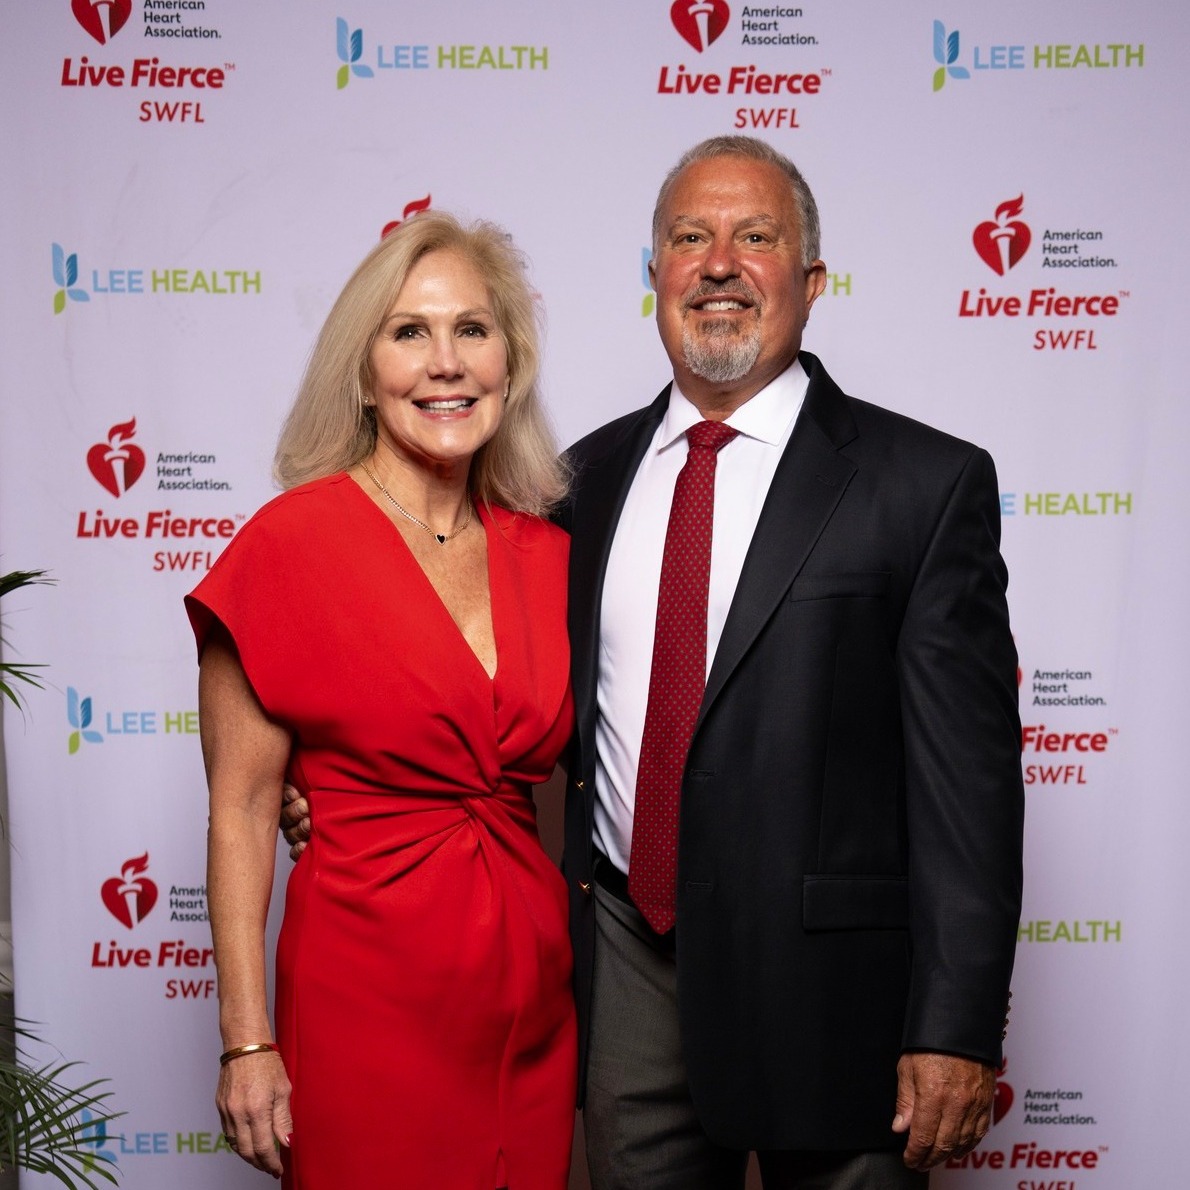 Our team repping @Lee_Health at the SWFL Go Red for Women 20th Anniversary Celebration! Shout-out to event co-chairs, Stephanie Wardein and Dr. Malissa Wood of Lee Health! #LeeHealth #HeartCare #SWFL @drmalissawood @GoRedForWomen @AmericanHeartFL